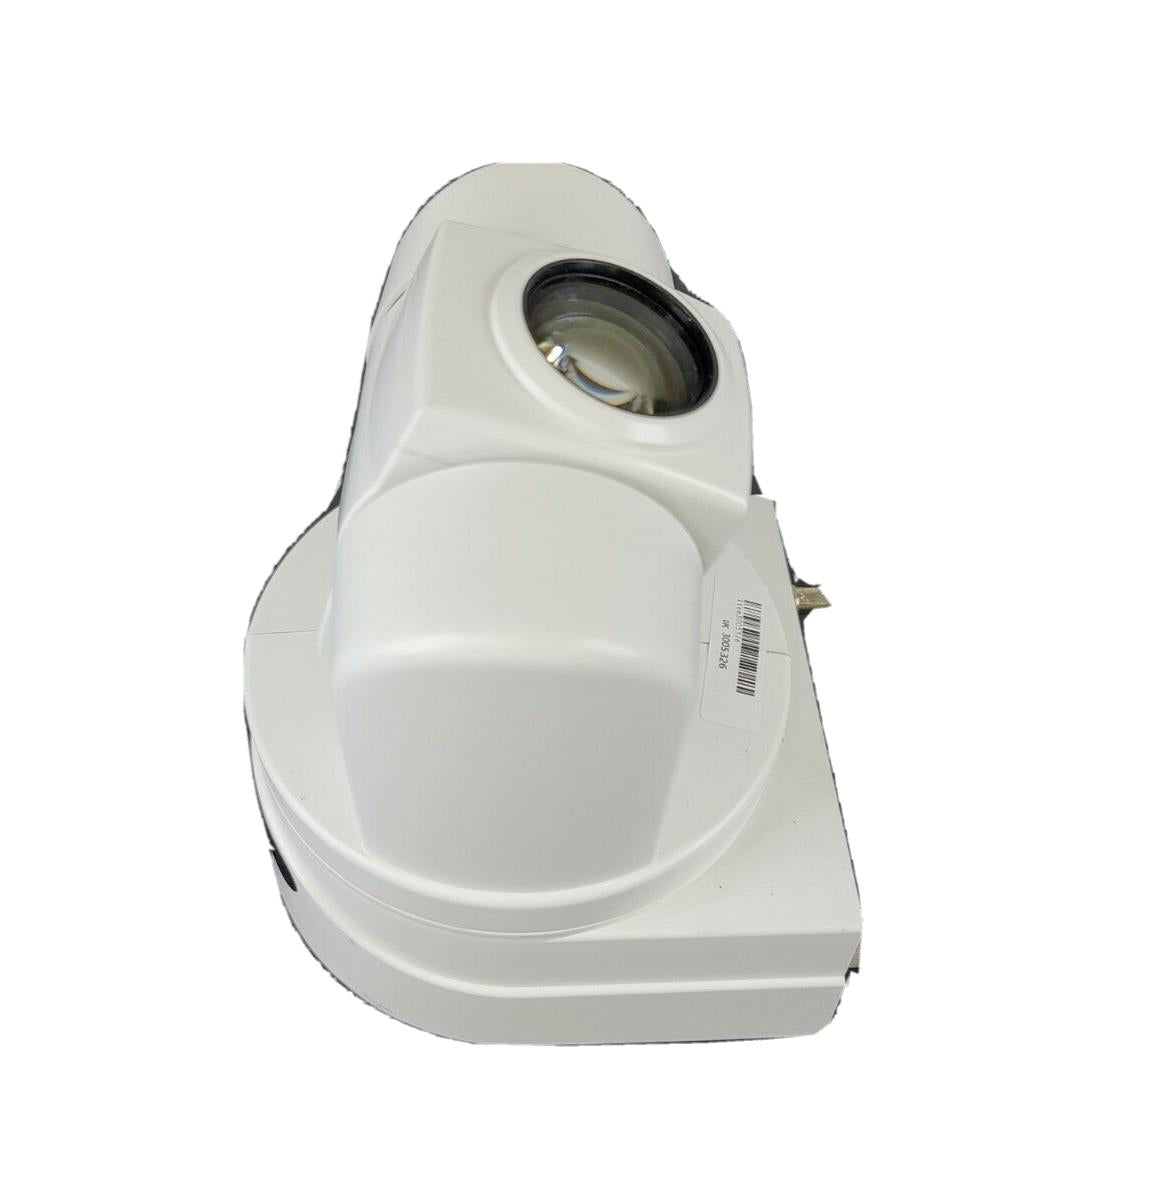 Vaddio ClearVIEW HD-18 Surveillance Camera